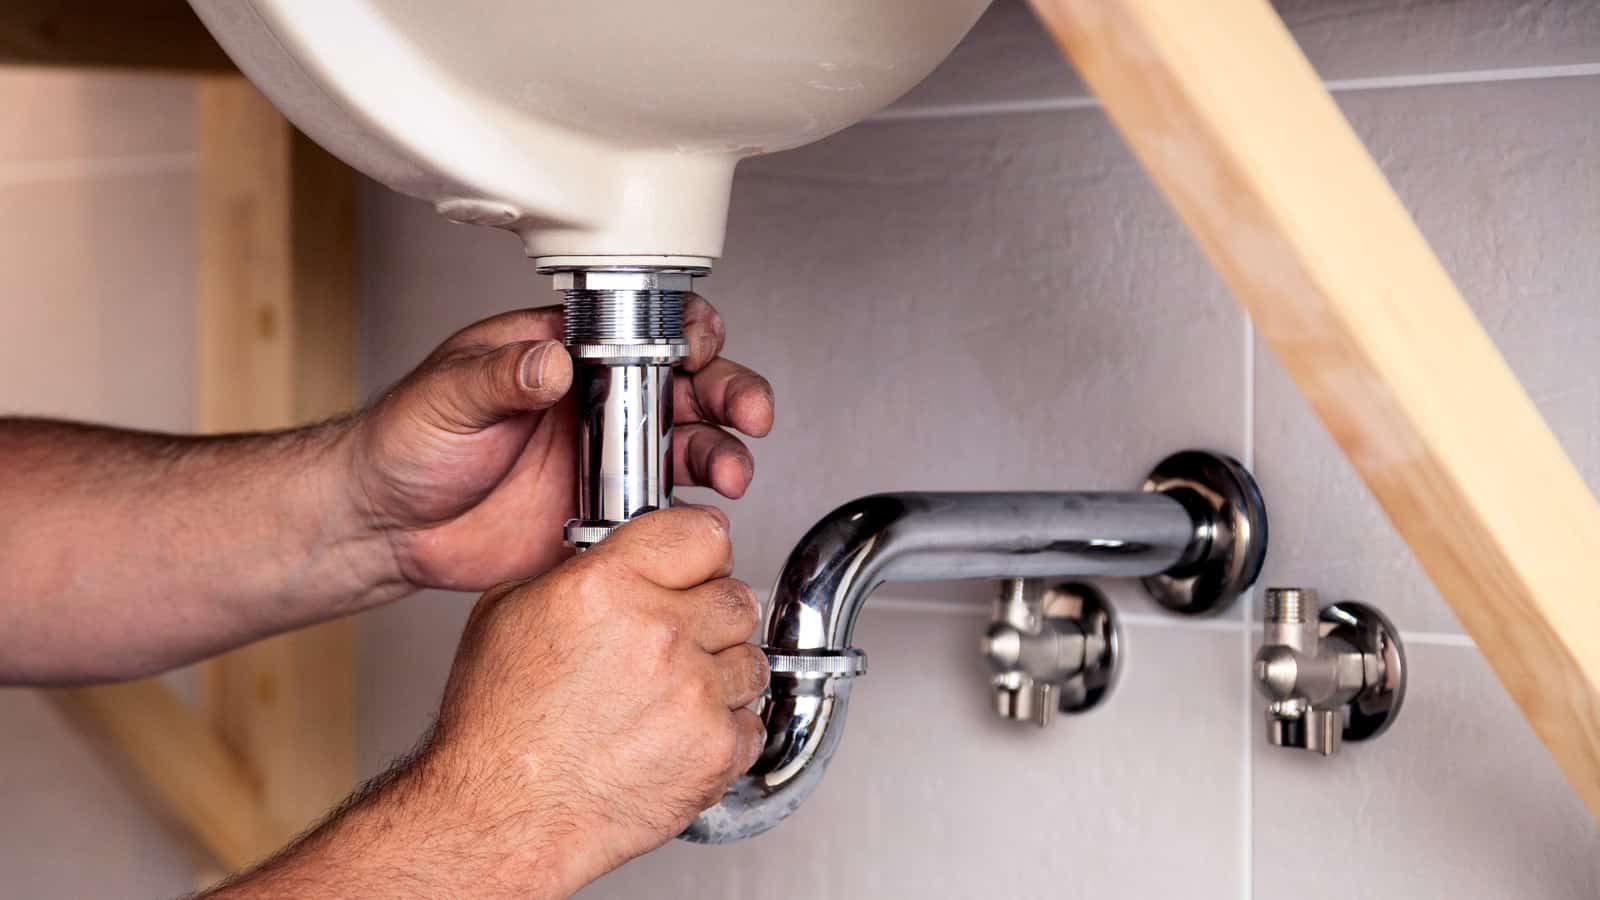 Miller and Sons Plumbing LLC of Miamisburg